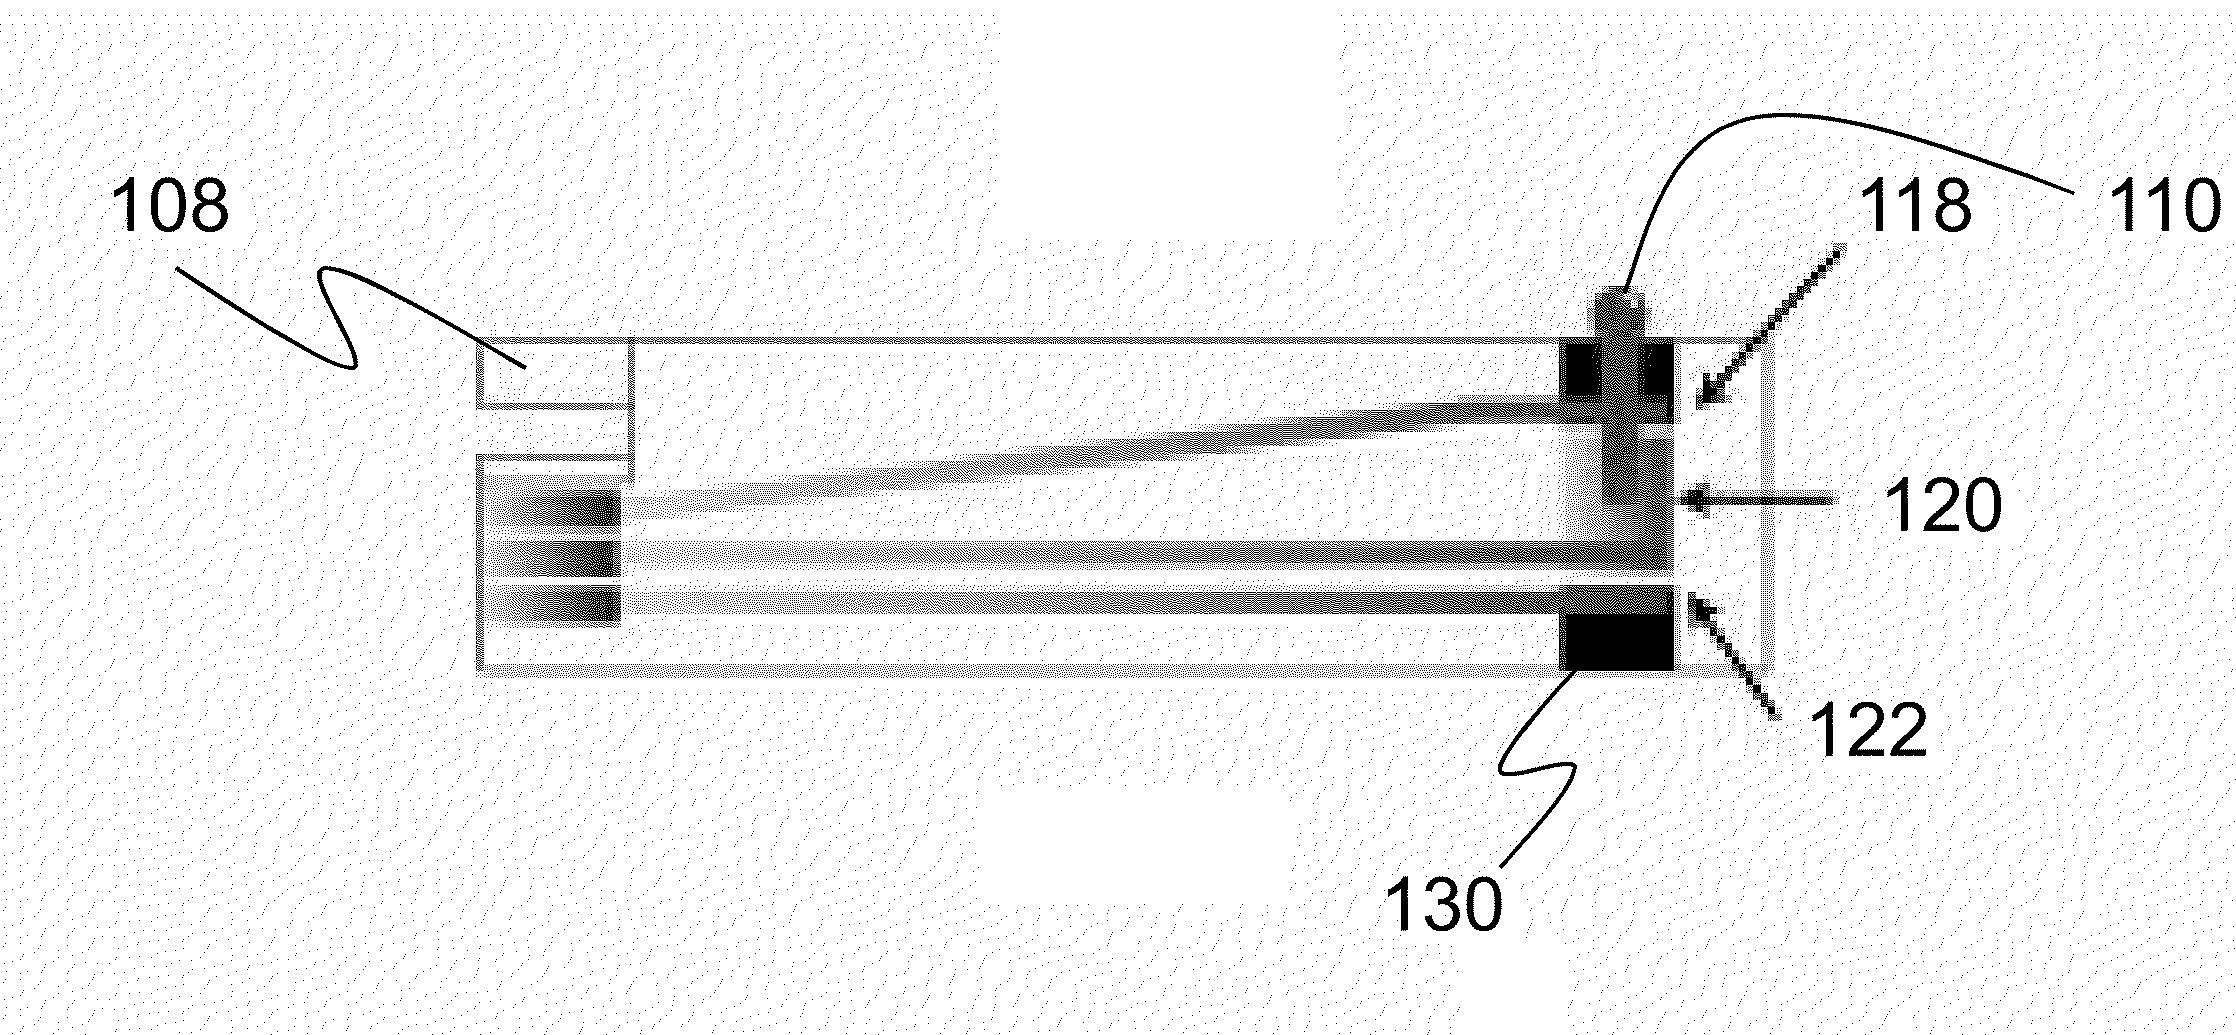 Analyte determination methods and devices